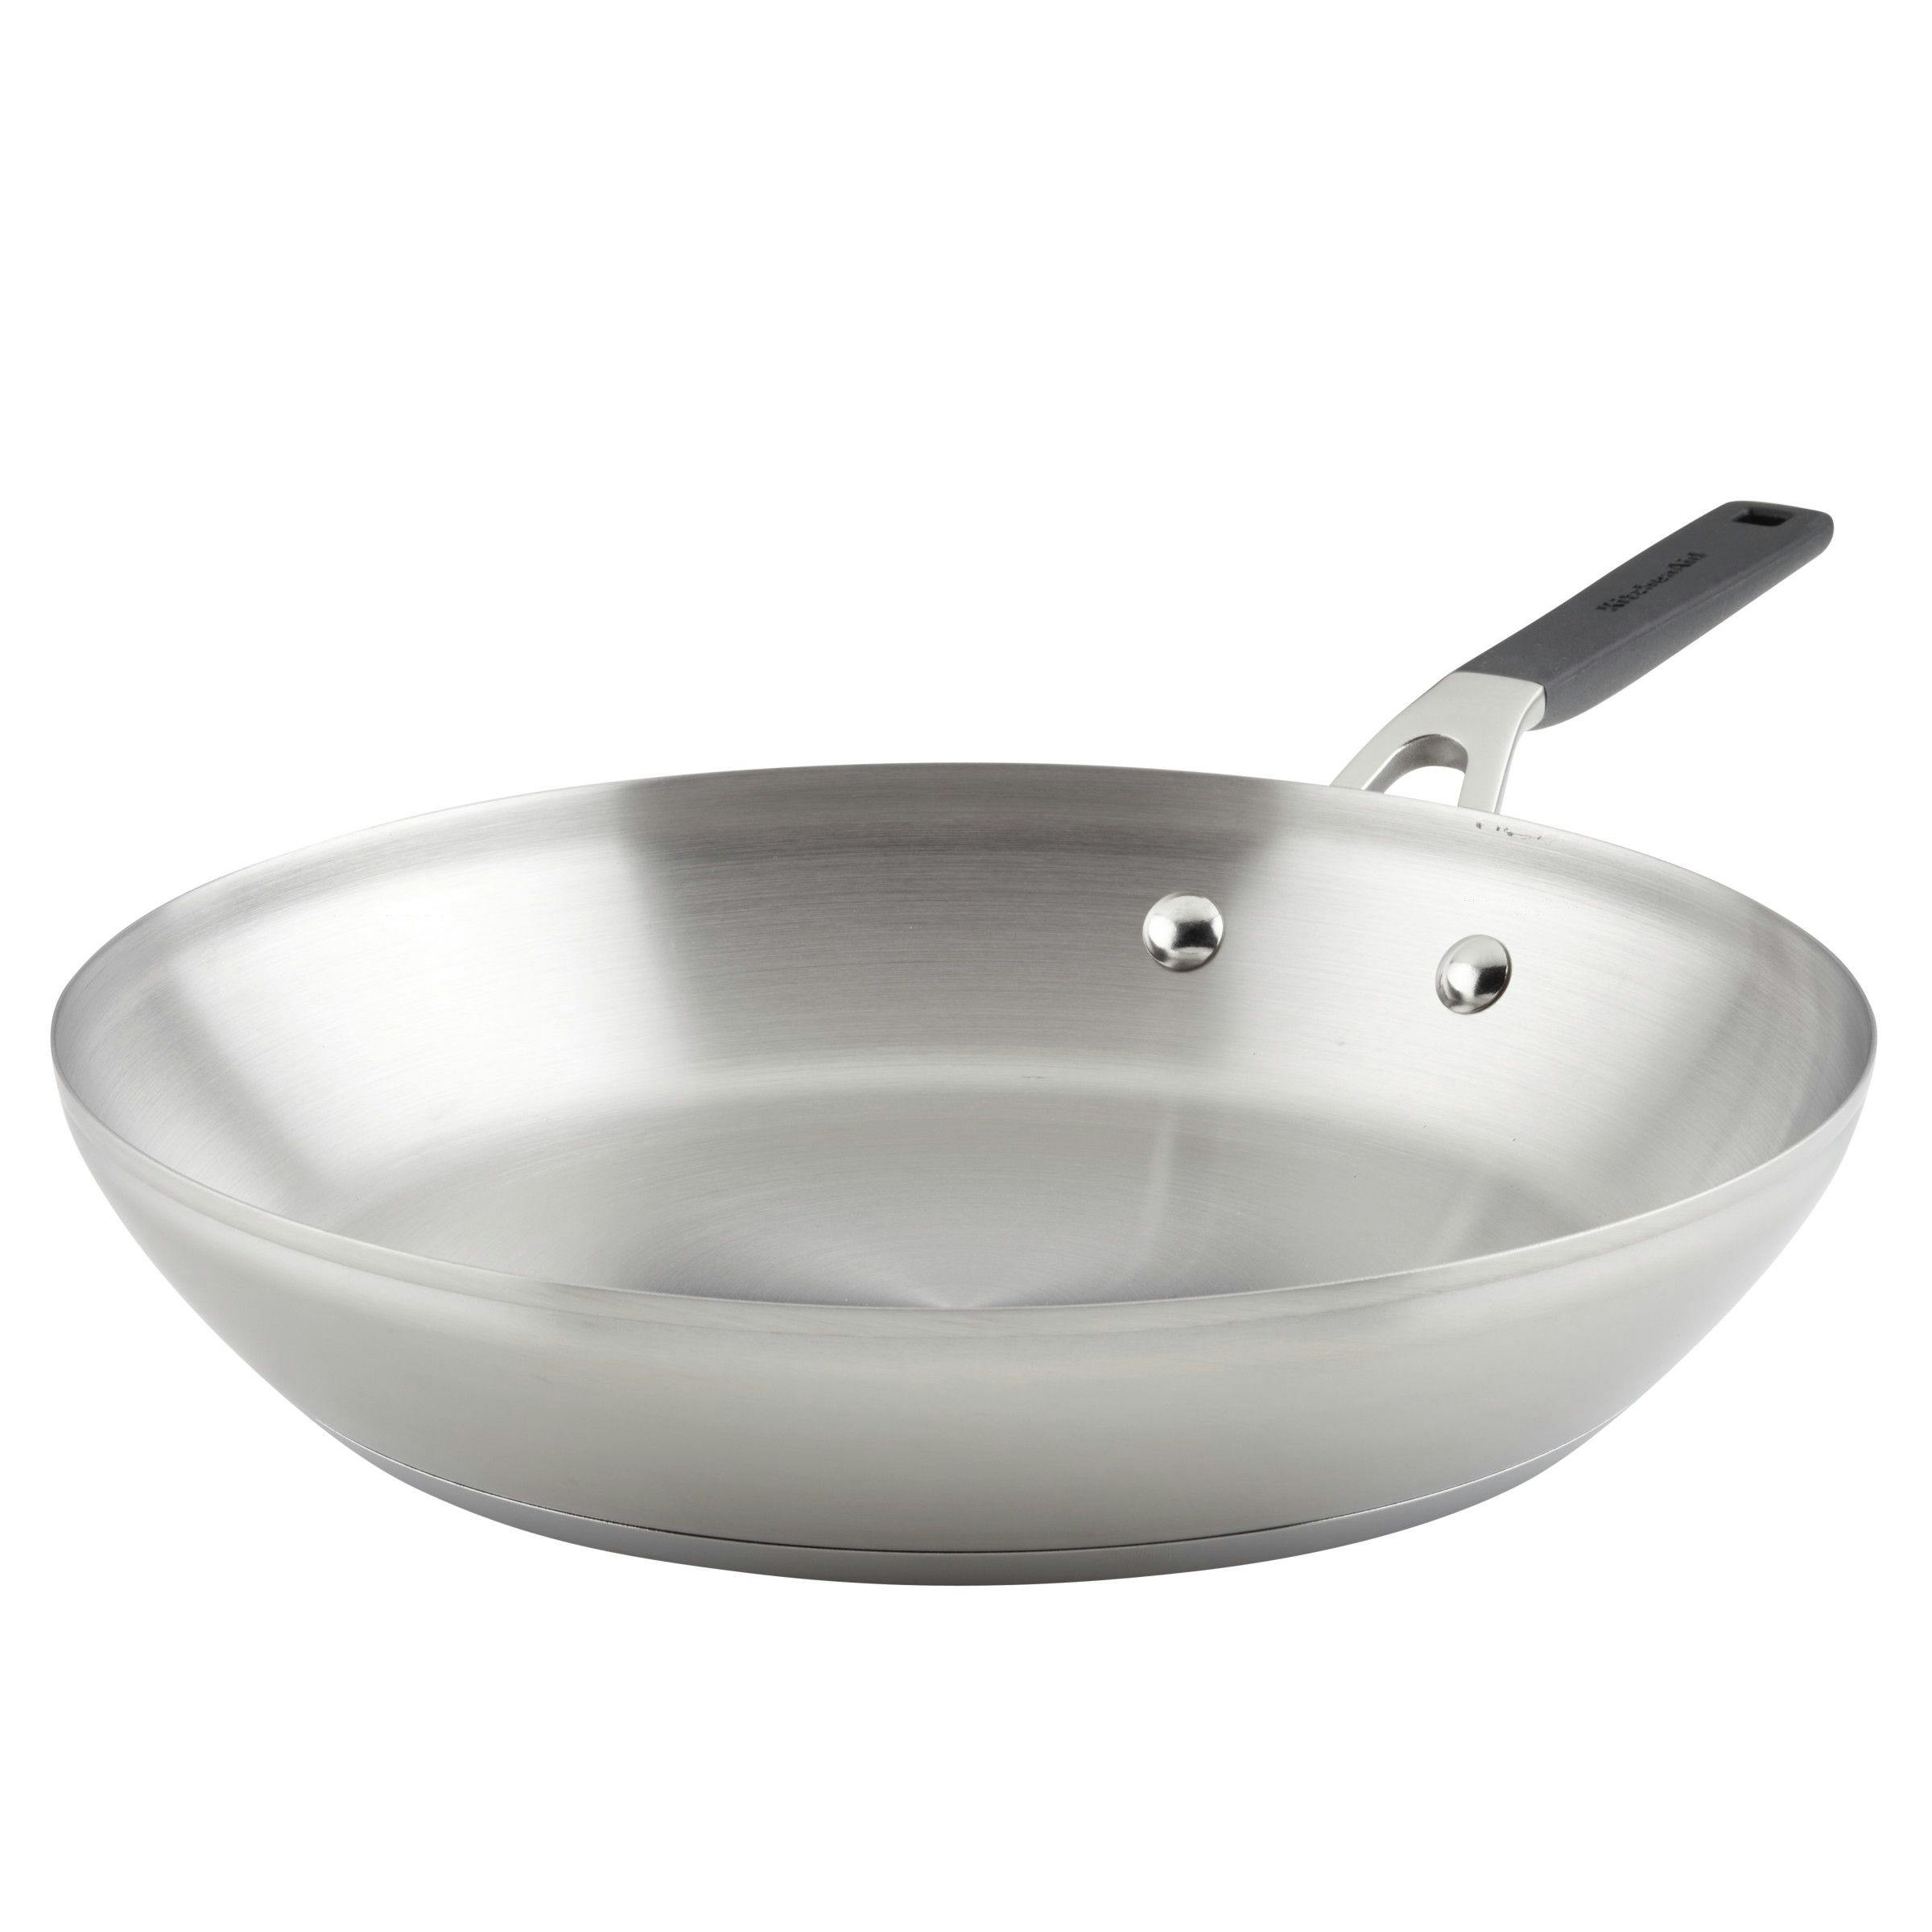 KitchenAid Stainless Steel Induction Frying Pan, 12-Inch, Brushed Stainless Steel